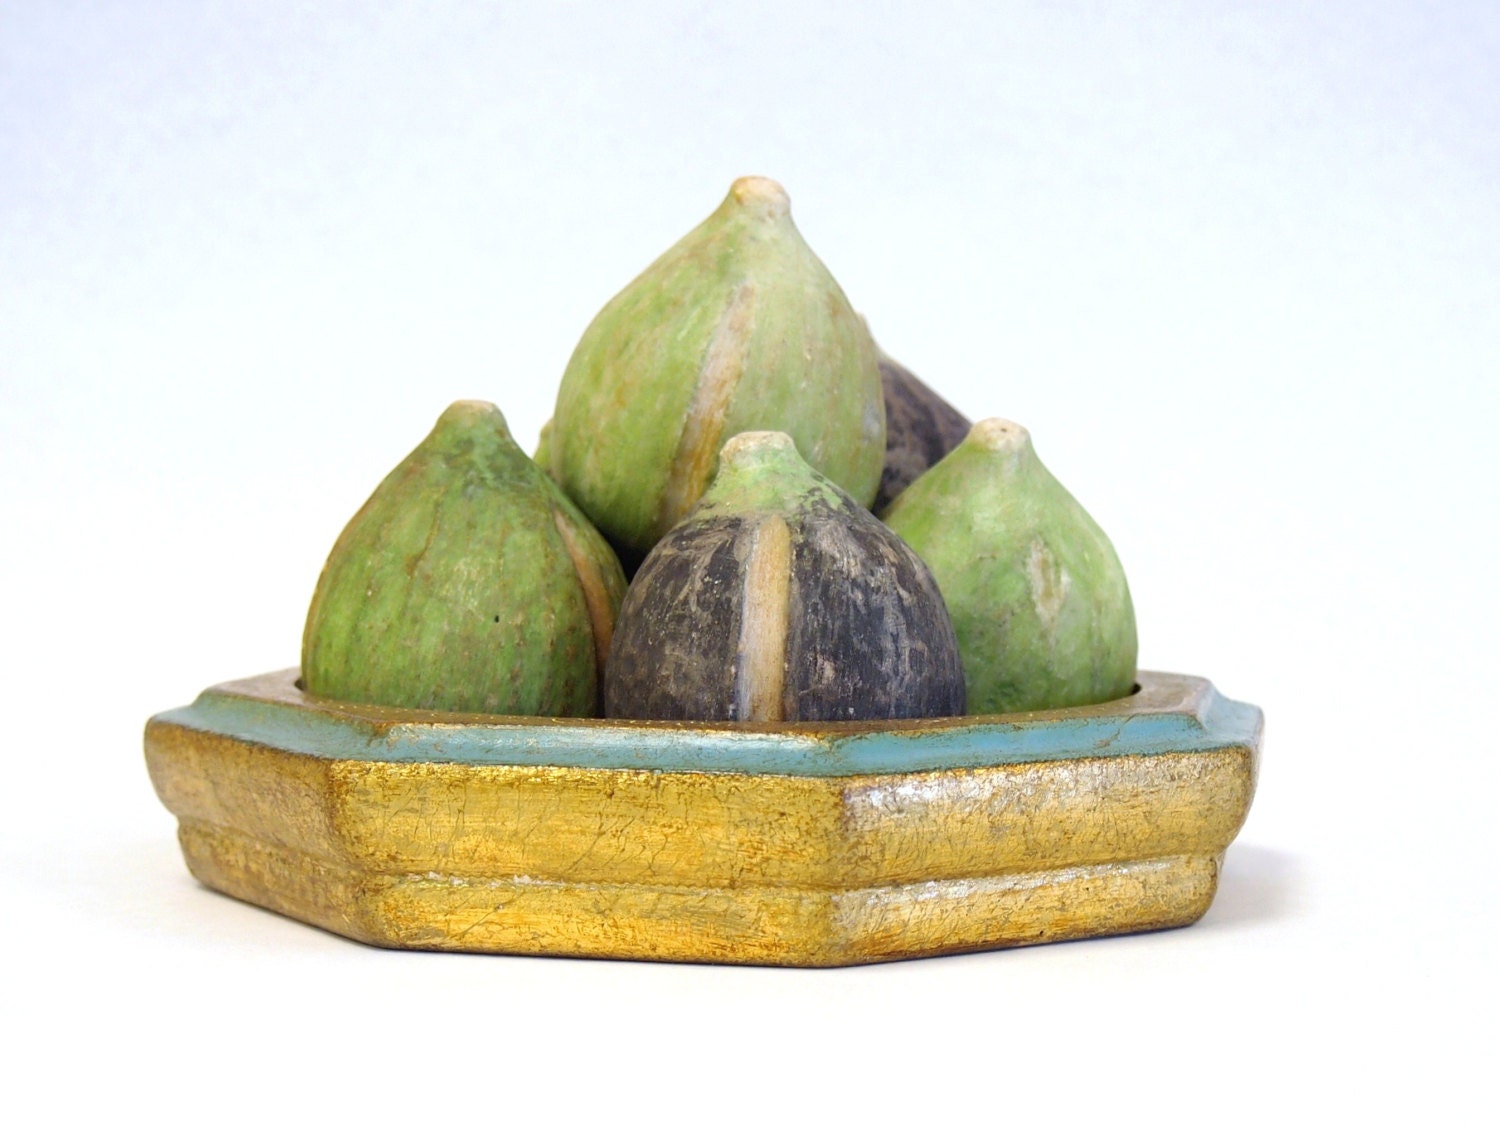 Rare Set of 6 Antique ITALIAN Alabaster Stone Fruit FIGS in Purple and Green Natural RUSTIC HandCarved Pieces - VivaEstelle